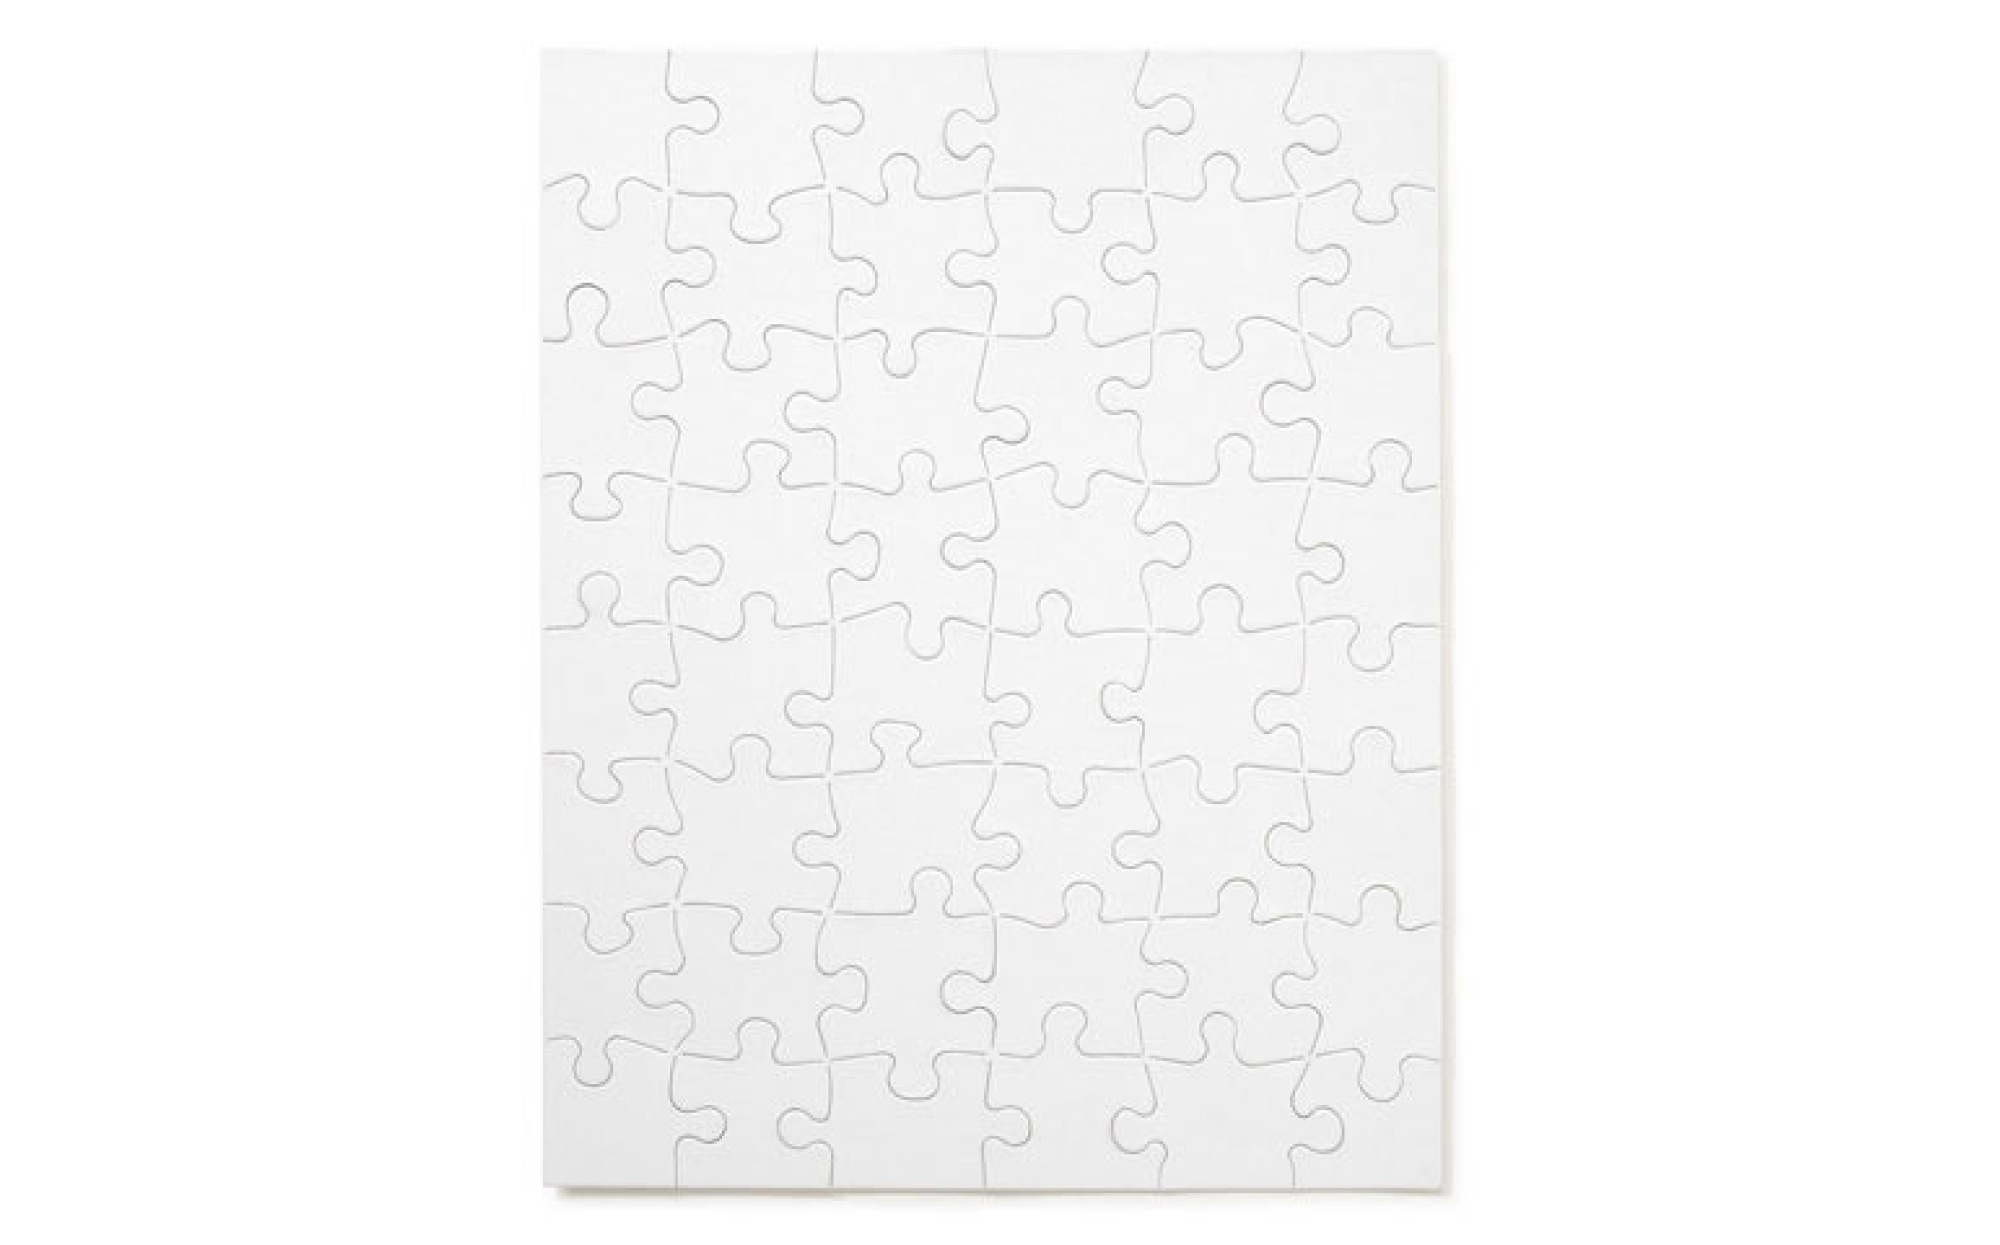 Large Blank Puzzle – Art Therapy